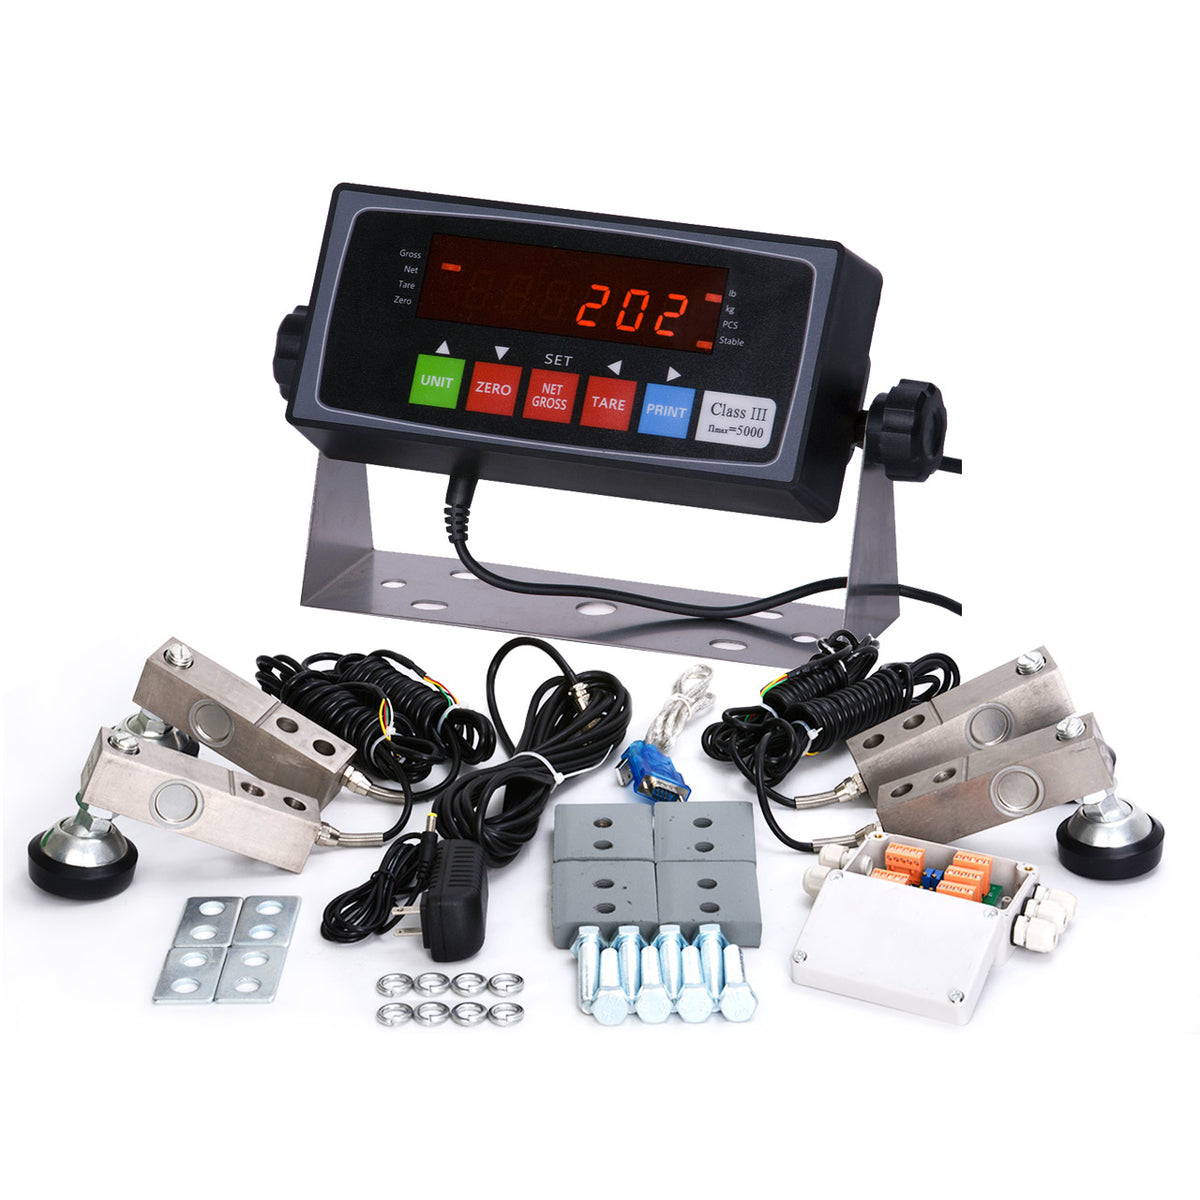 PEC Tools Digital Indicator Kit For Floor Scale for Warehouse and Animal  Weighing - 5,000 Lbs. Capacity Load Cells, Mounting Plates, and Summing  Card